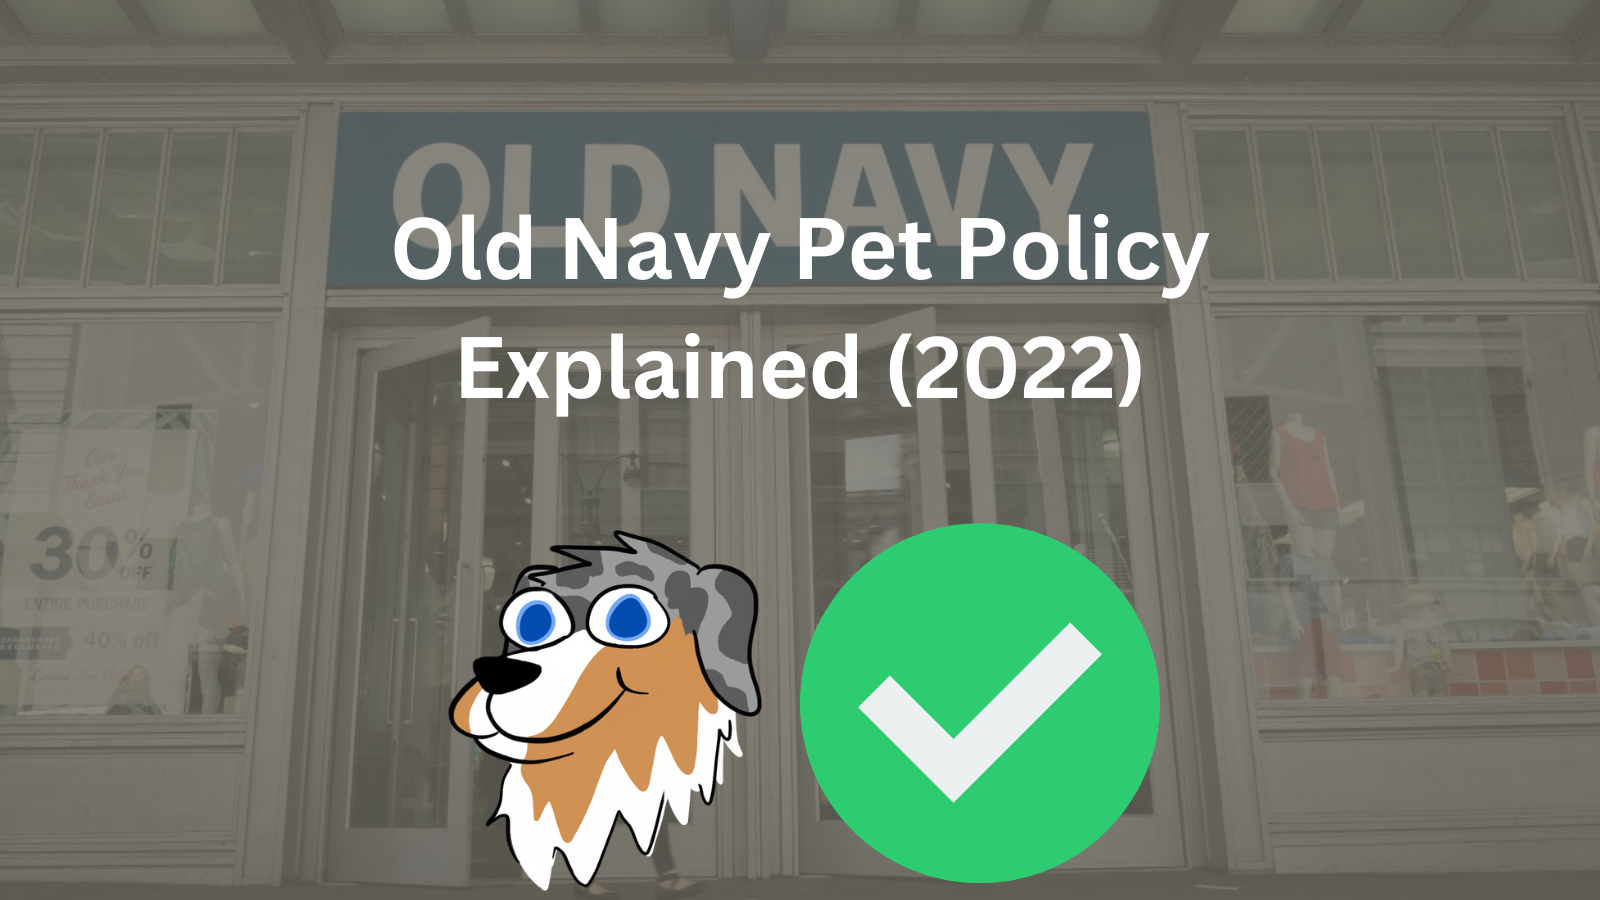 Image Text: "Old Navy Pet Policy Explained (2022)" Call Store Ahead of time.